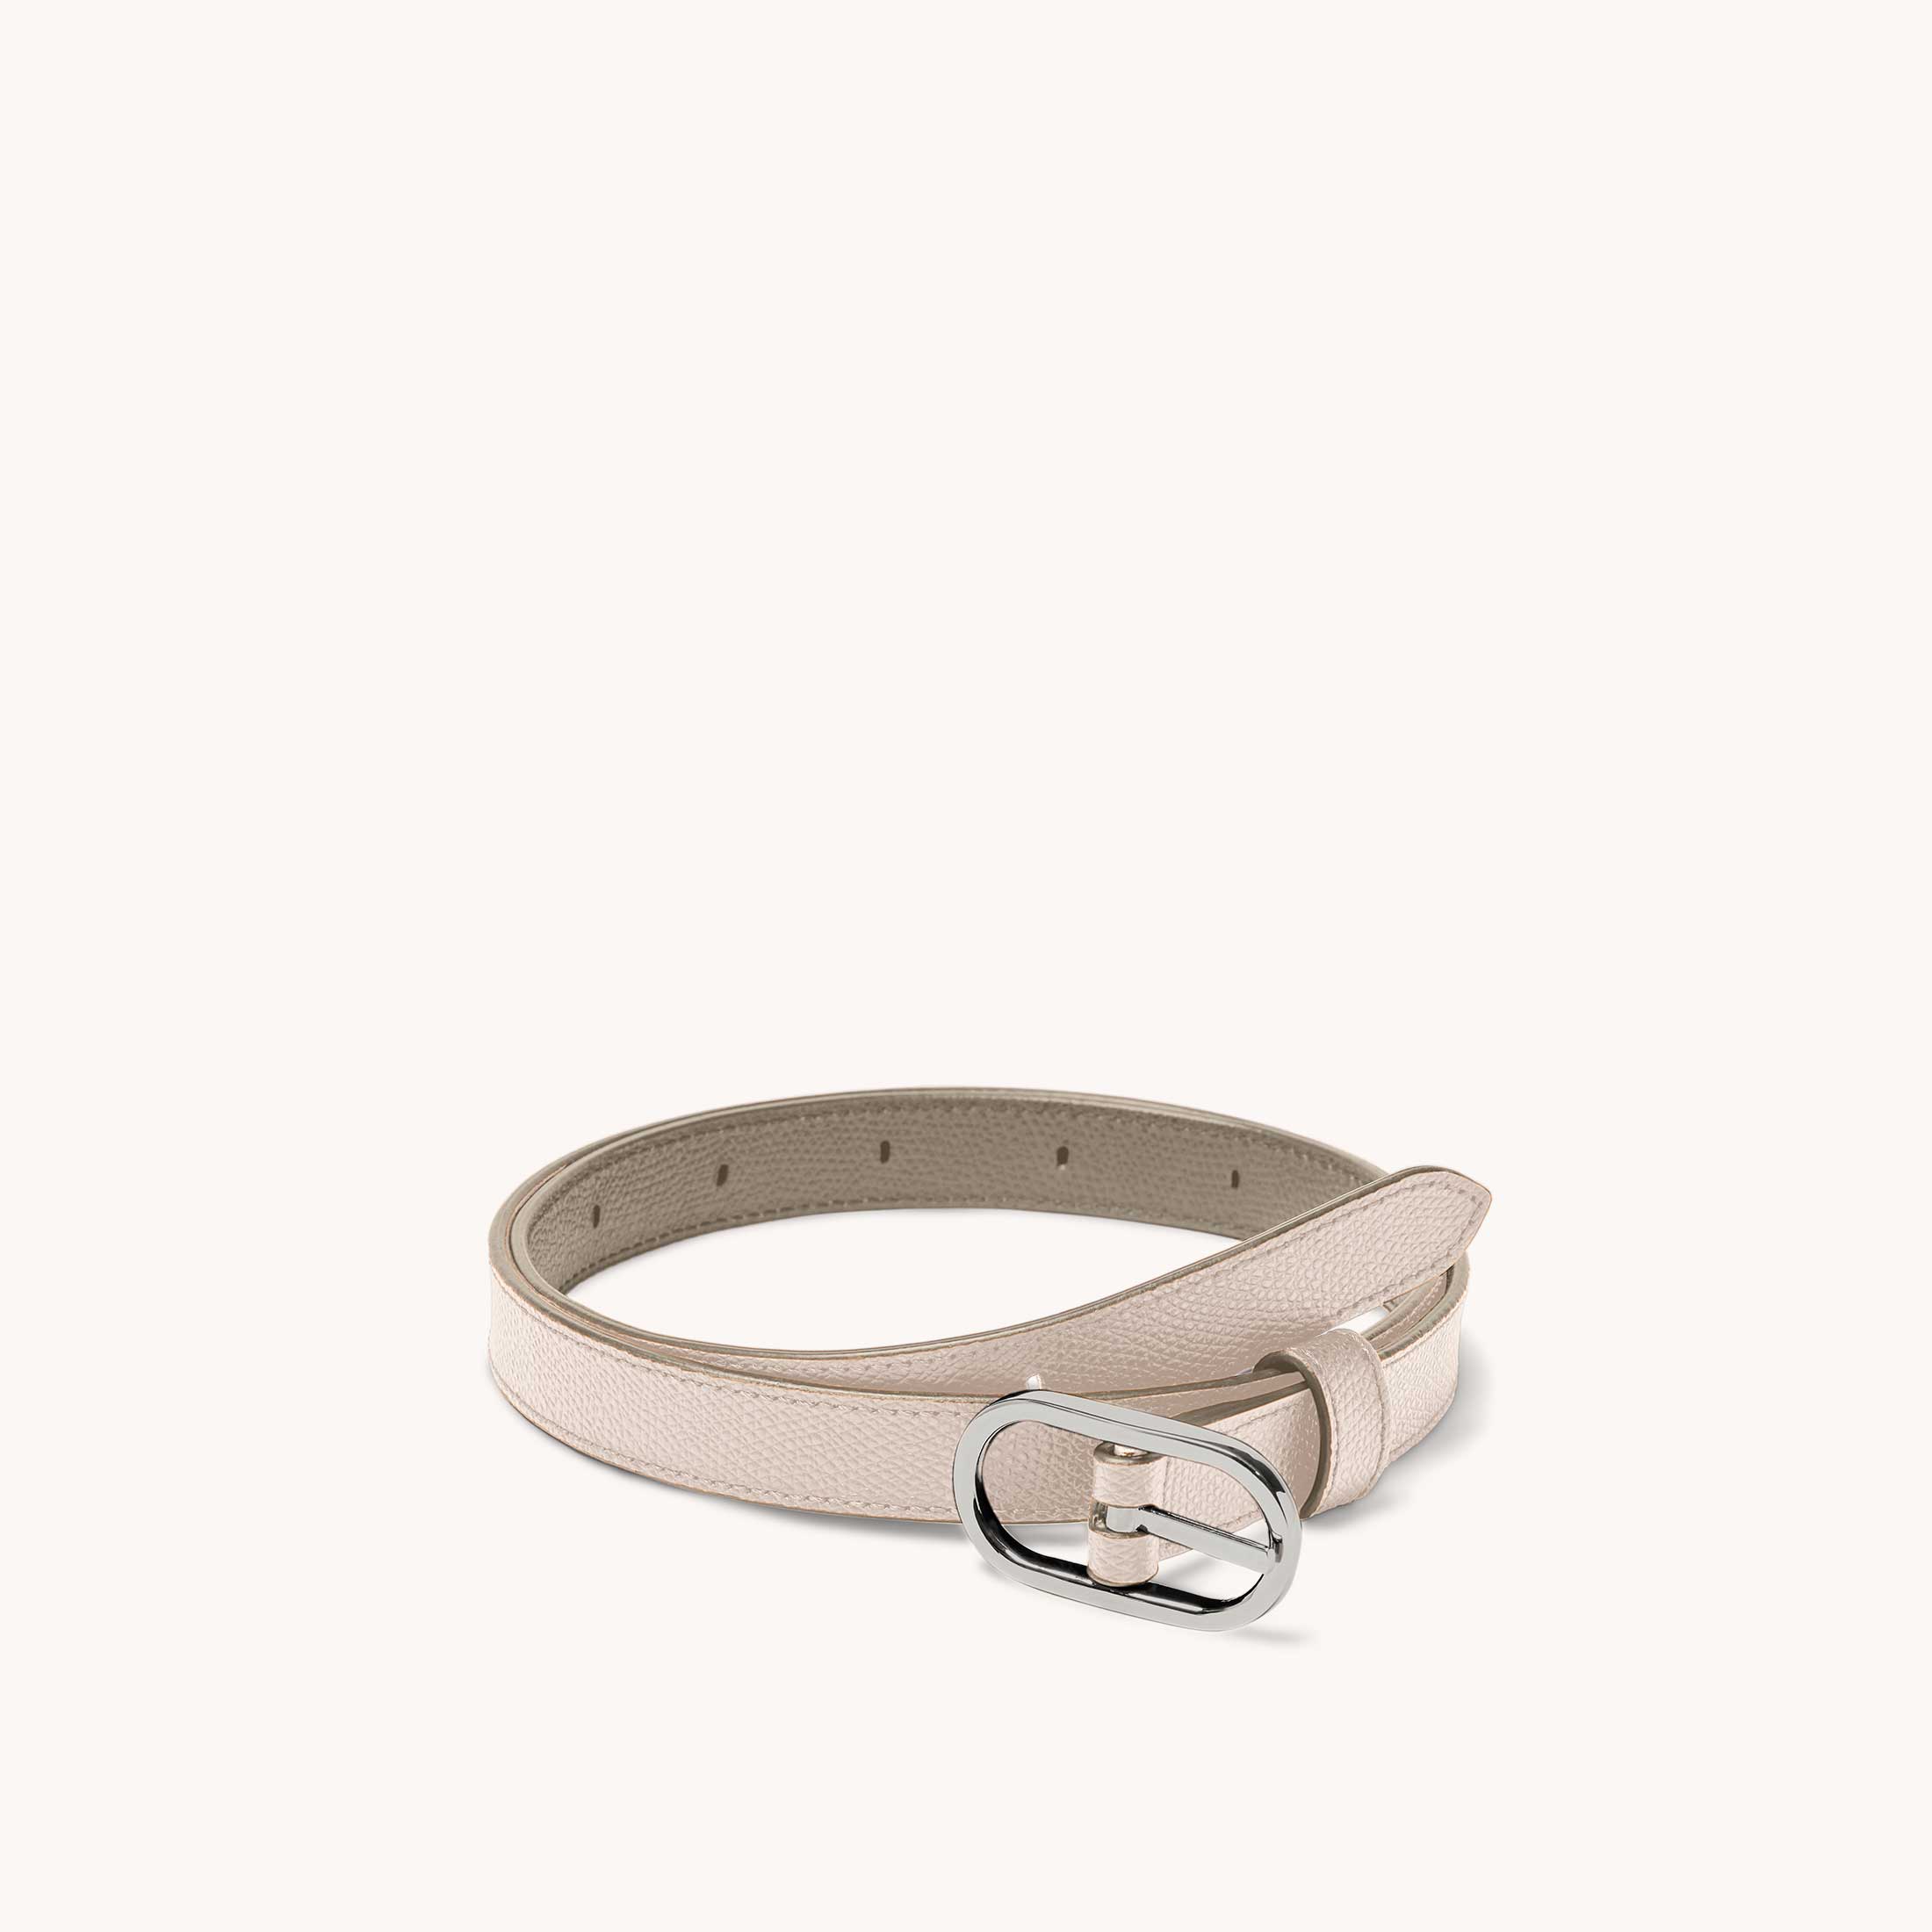 Reversible Shoulder Strap Colorblock Blush/Sand with Silver Hardware in Two Loops
